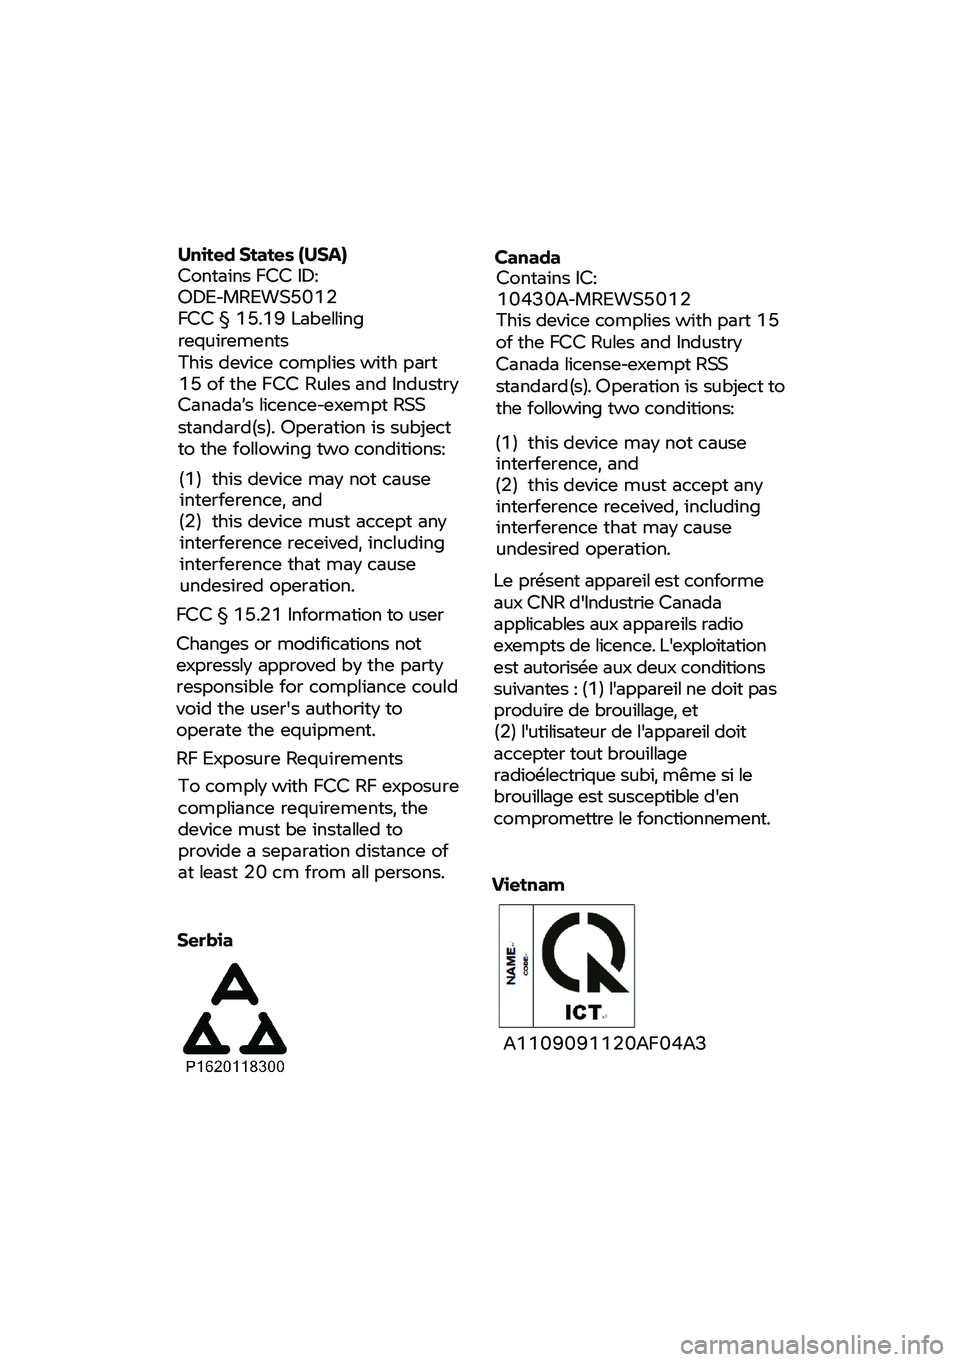 BMW MOTORRAD C 400 X 2021  Manual do condutor (in Portuguese) United 
States (USA) 
Contains FCC ID:                           
ODE-MREWS5012
FCC  §
 15.19 Labelling 
requirements
This  device  complies  with part 
15  of the  FCC 

Rules and Industry 
Canada�